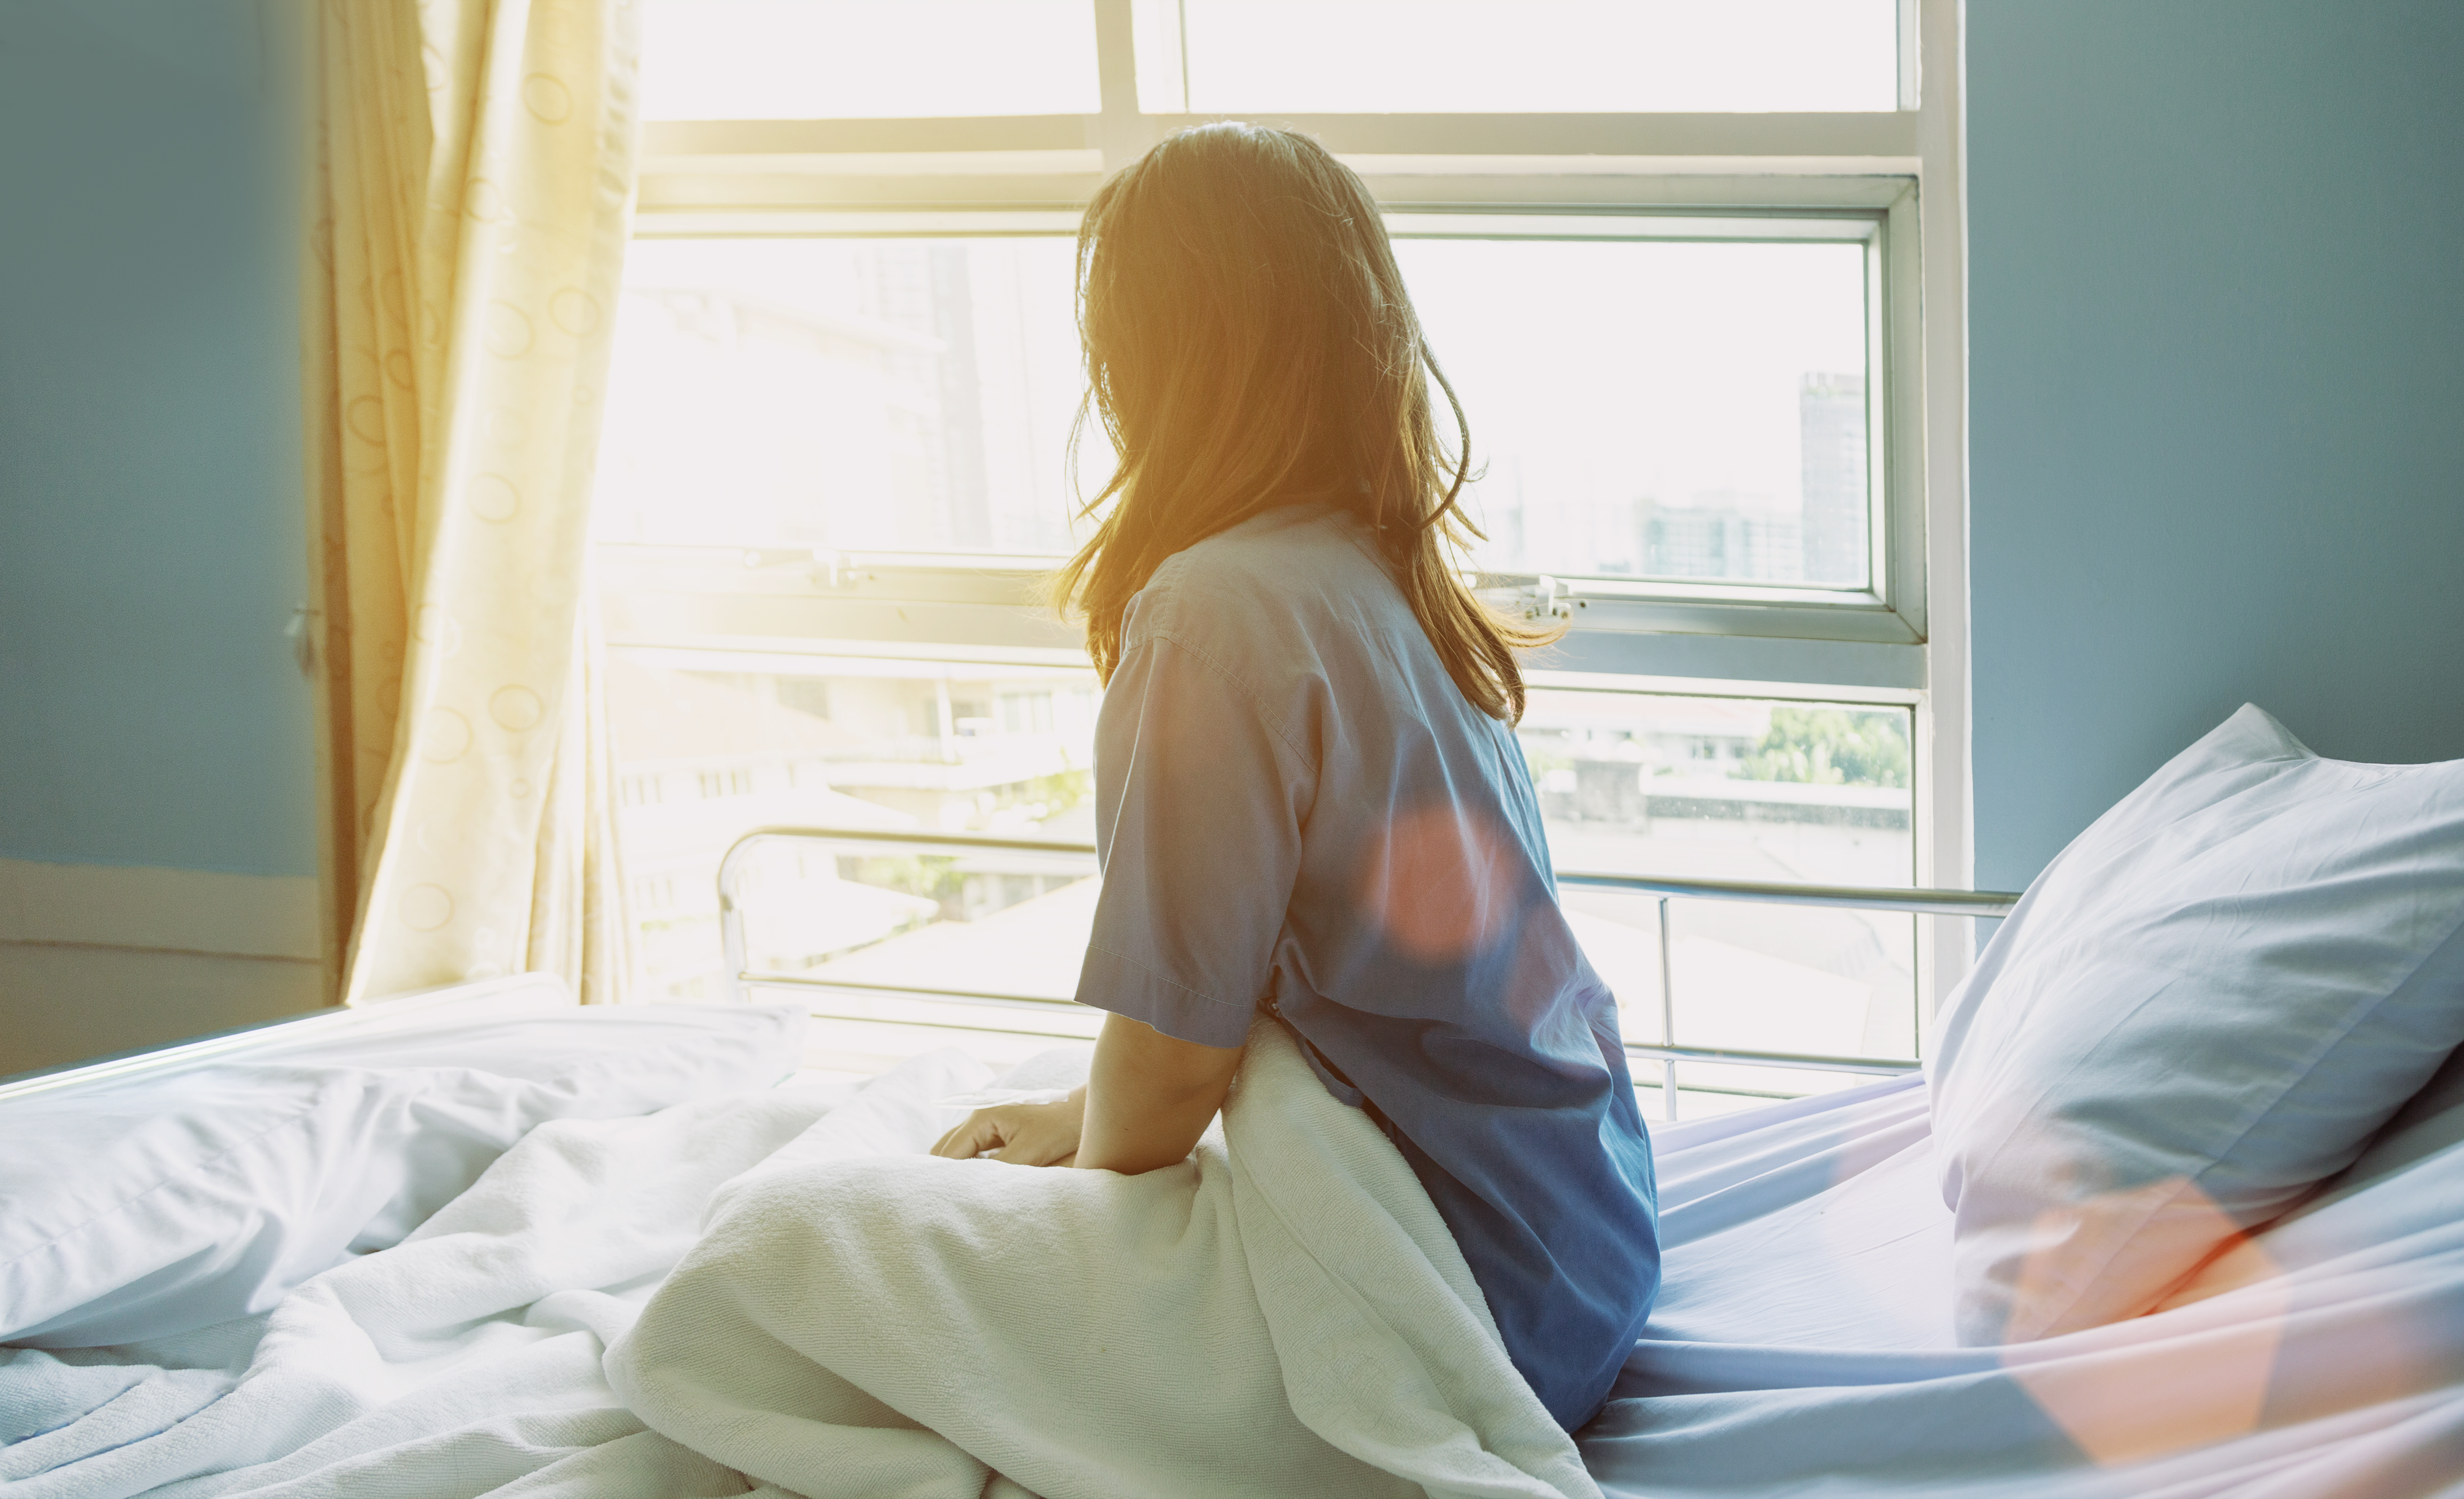 A woman looks outside a window while sitting on a hospital bed | Source: Shutterstock